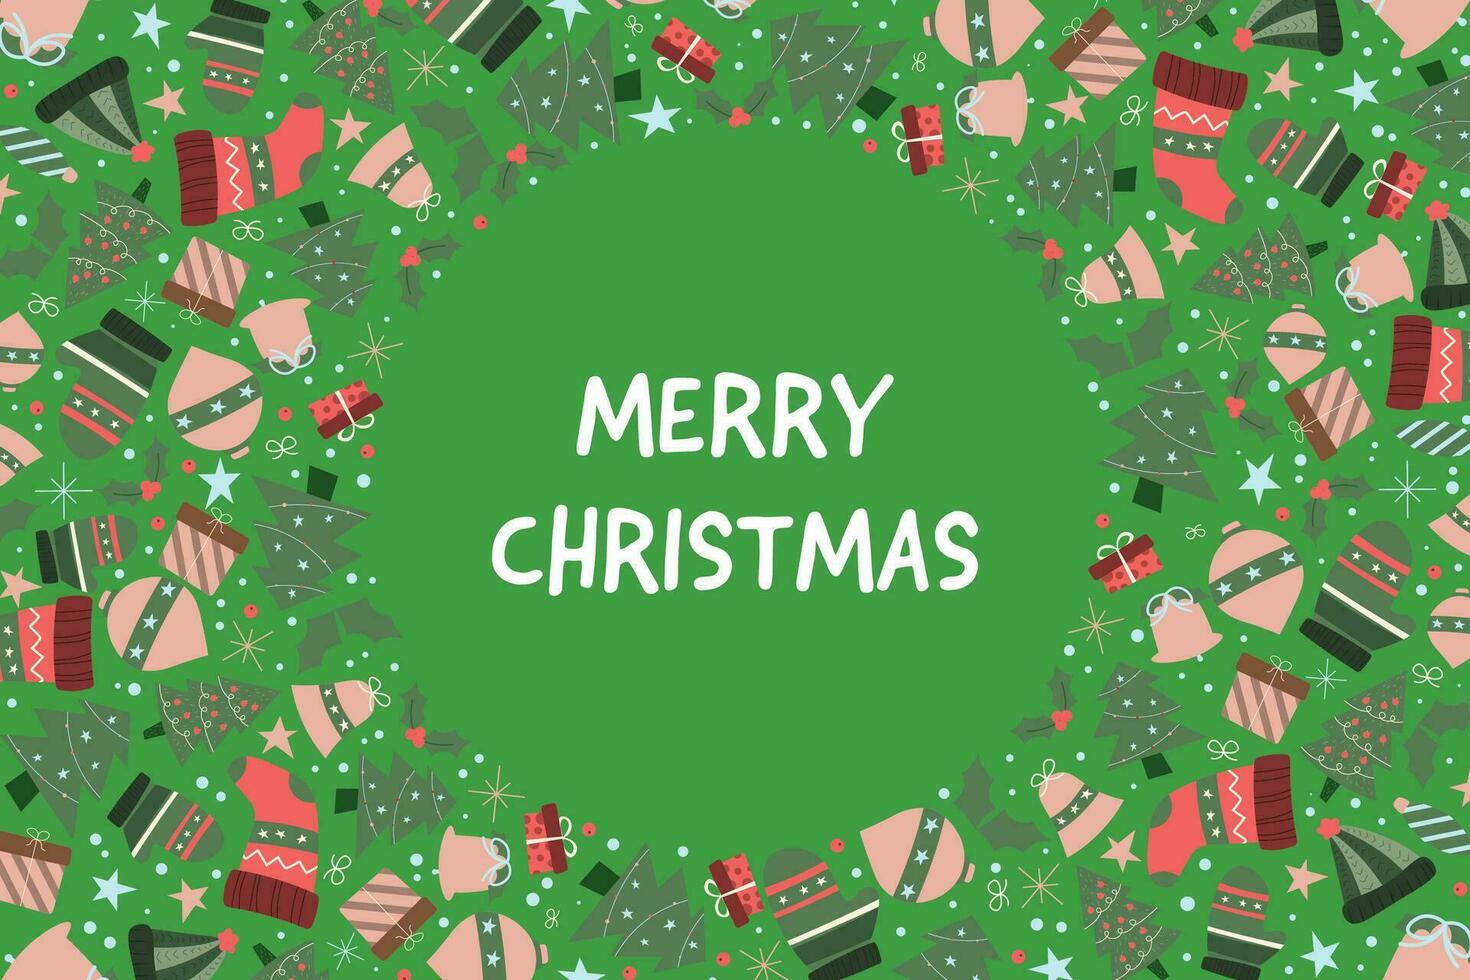 Merry Christmas background. vector